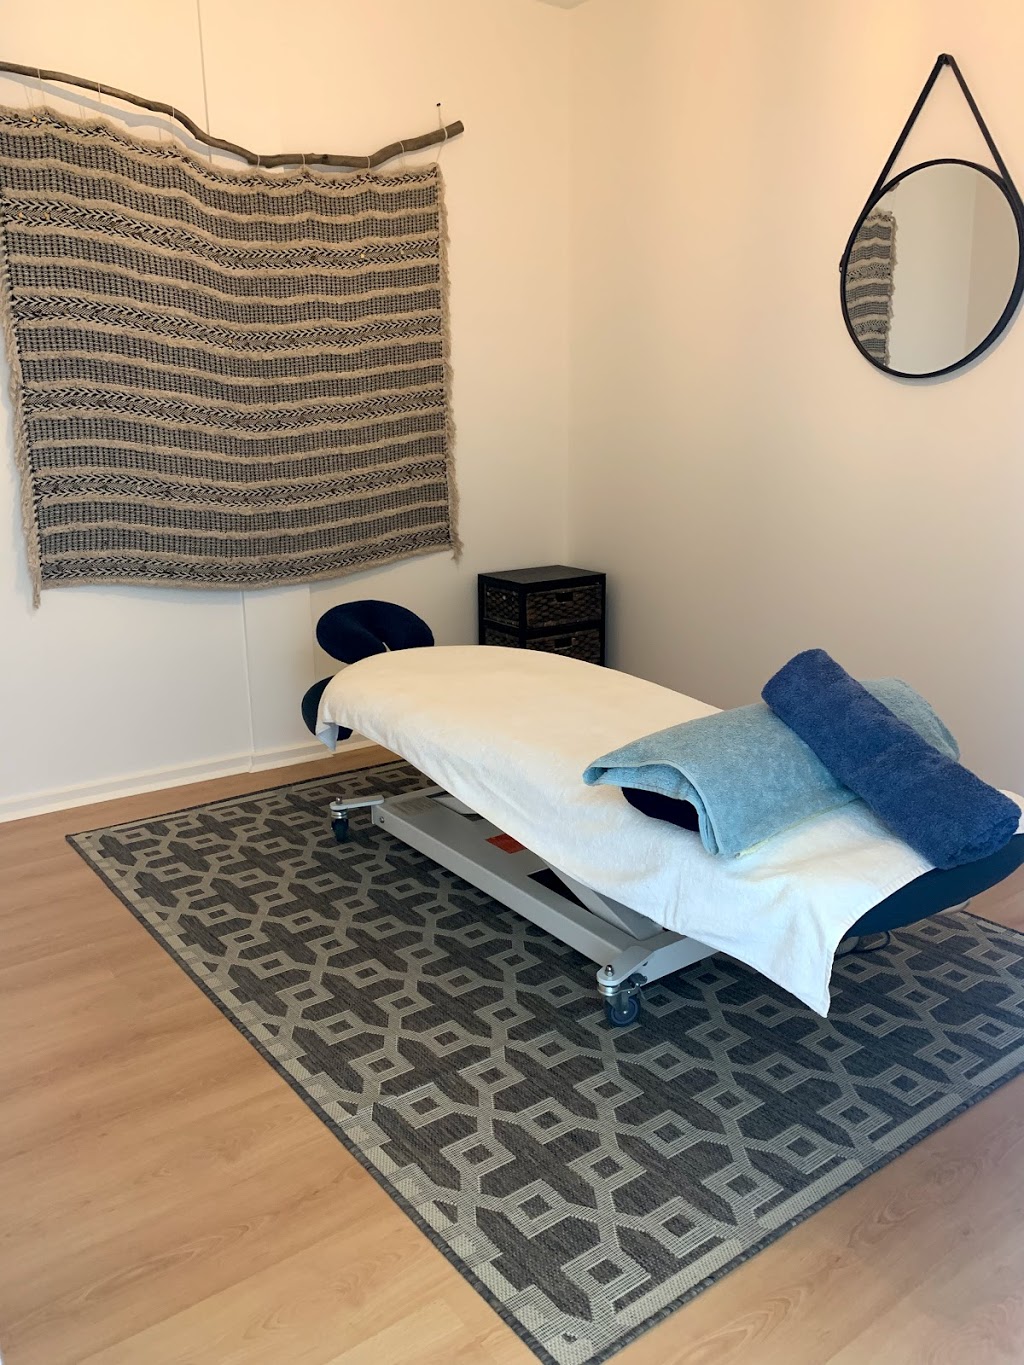 Grounded Therapies | 8/488 Nepean Hwy, Chelsea VIC 3196, Australia | Phone: 0439 220 136